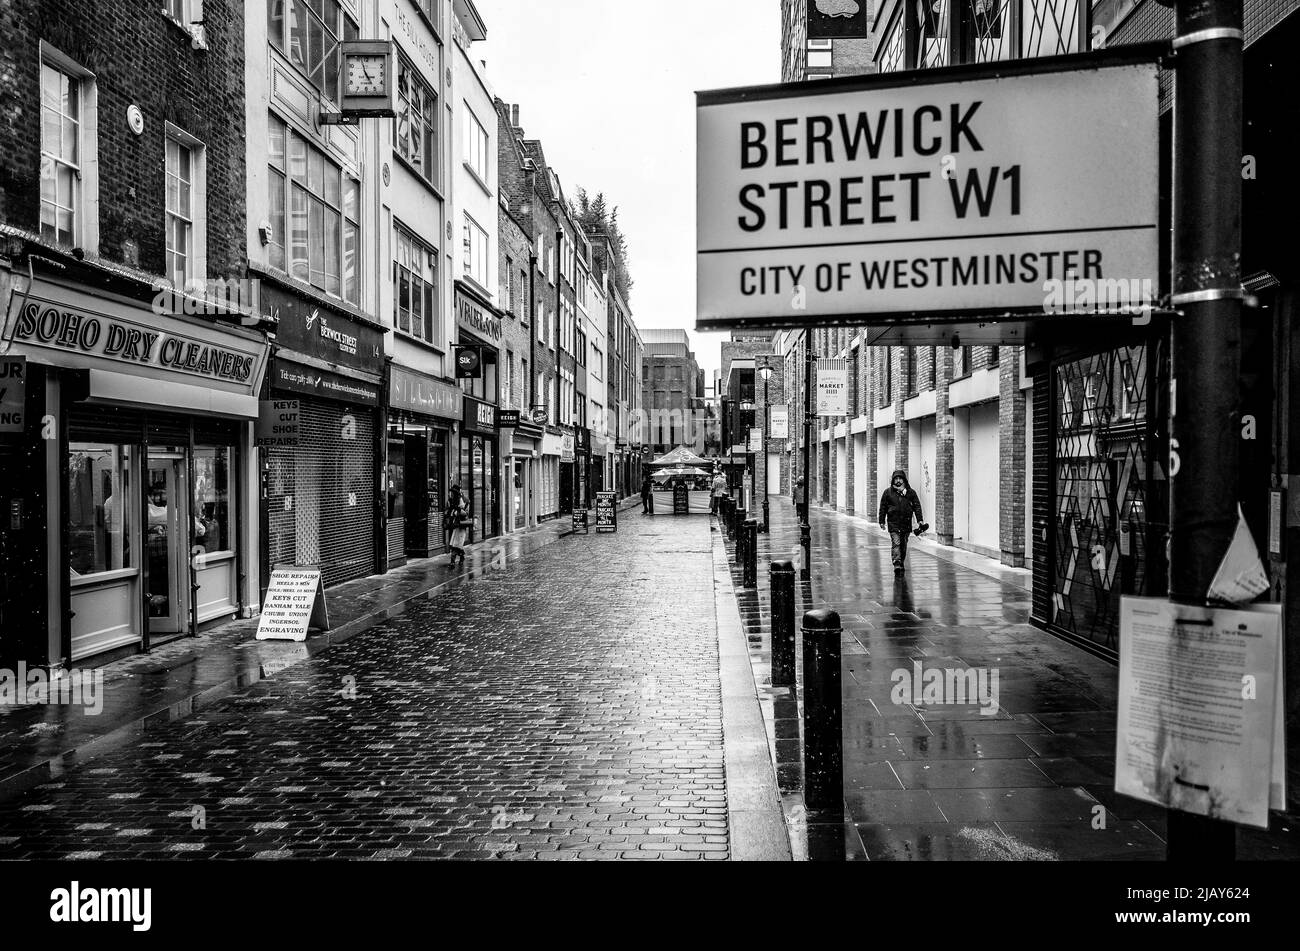 Berwick street on a rainy day in London's Soho area, during lockdown. Black and white street photography Stock Photo